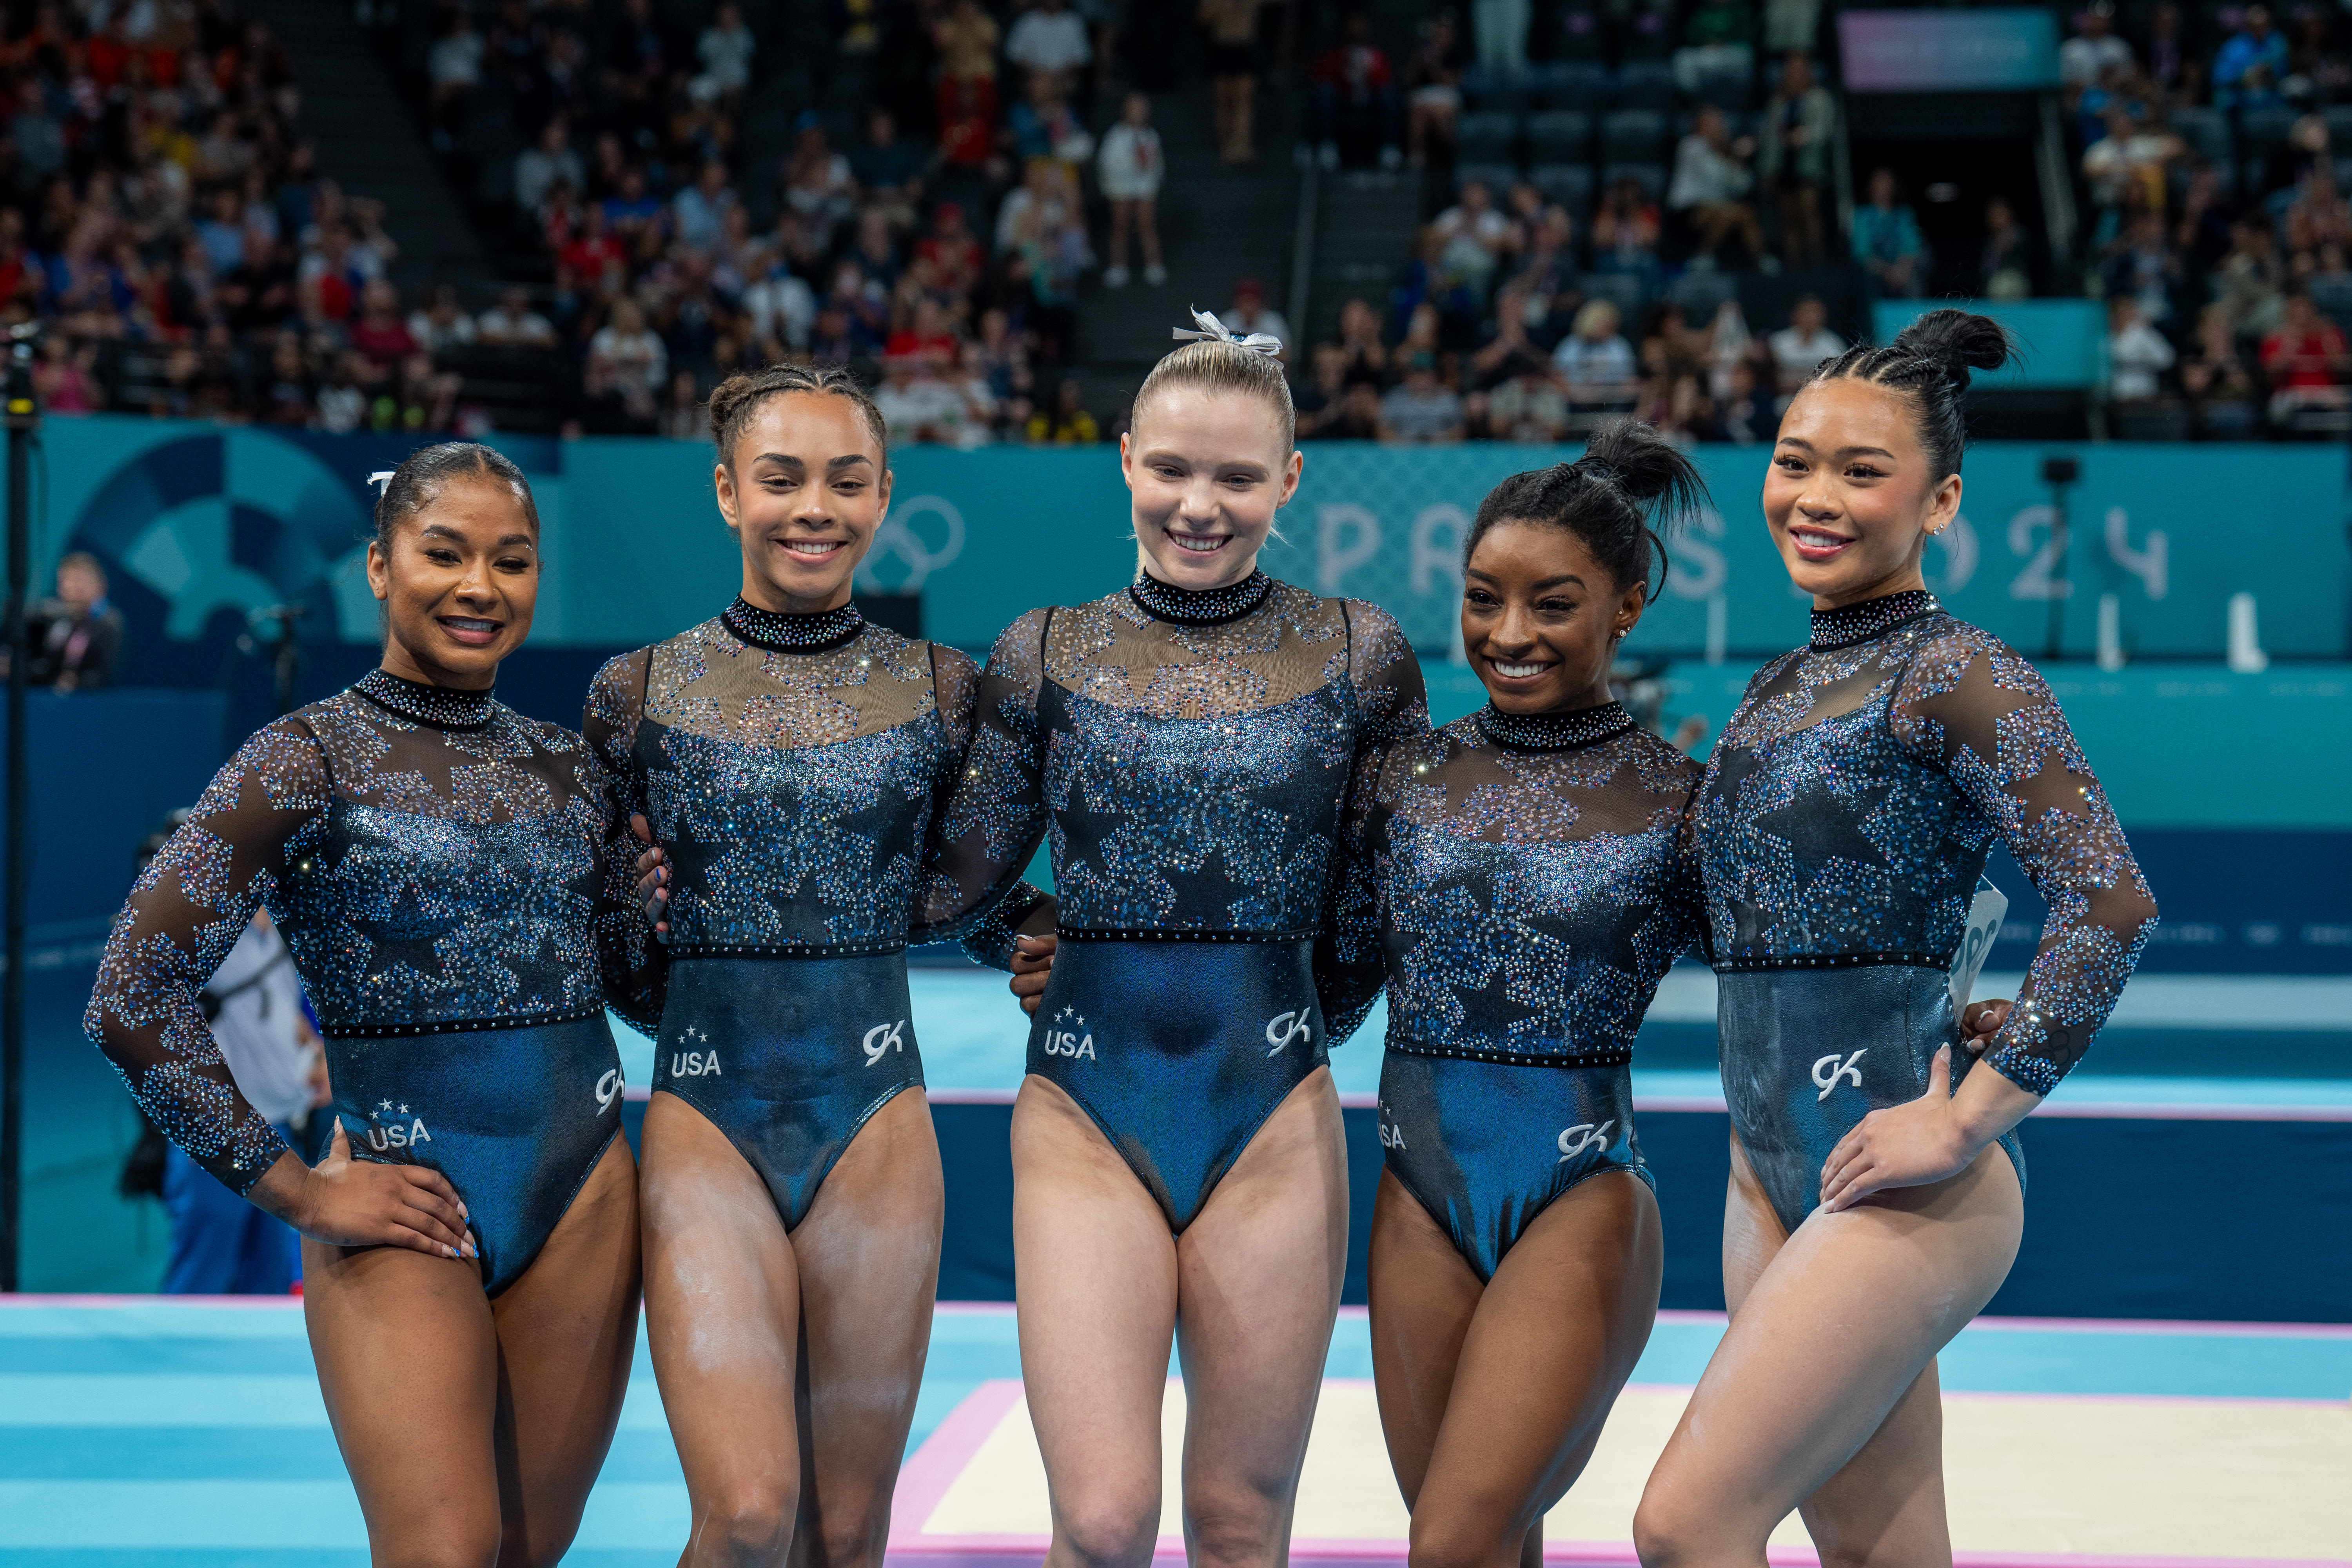 Taylor Swift and Beyoncé set the tone for Team USA gymnasts: What to know about the music behind their dynamo floor routines